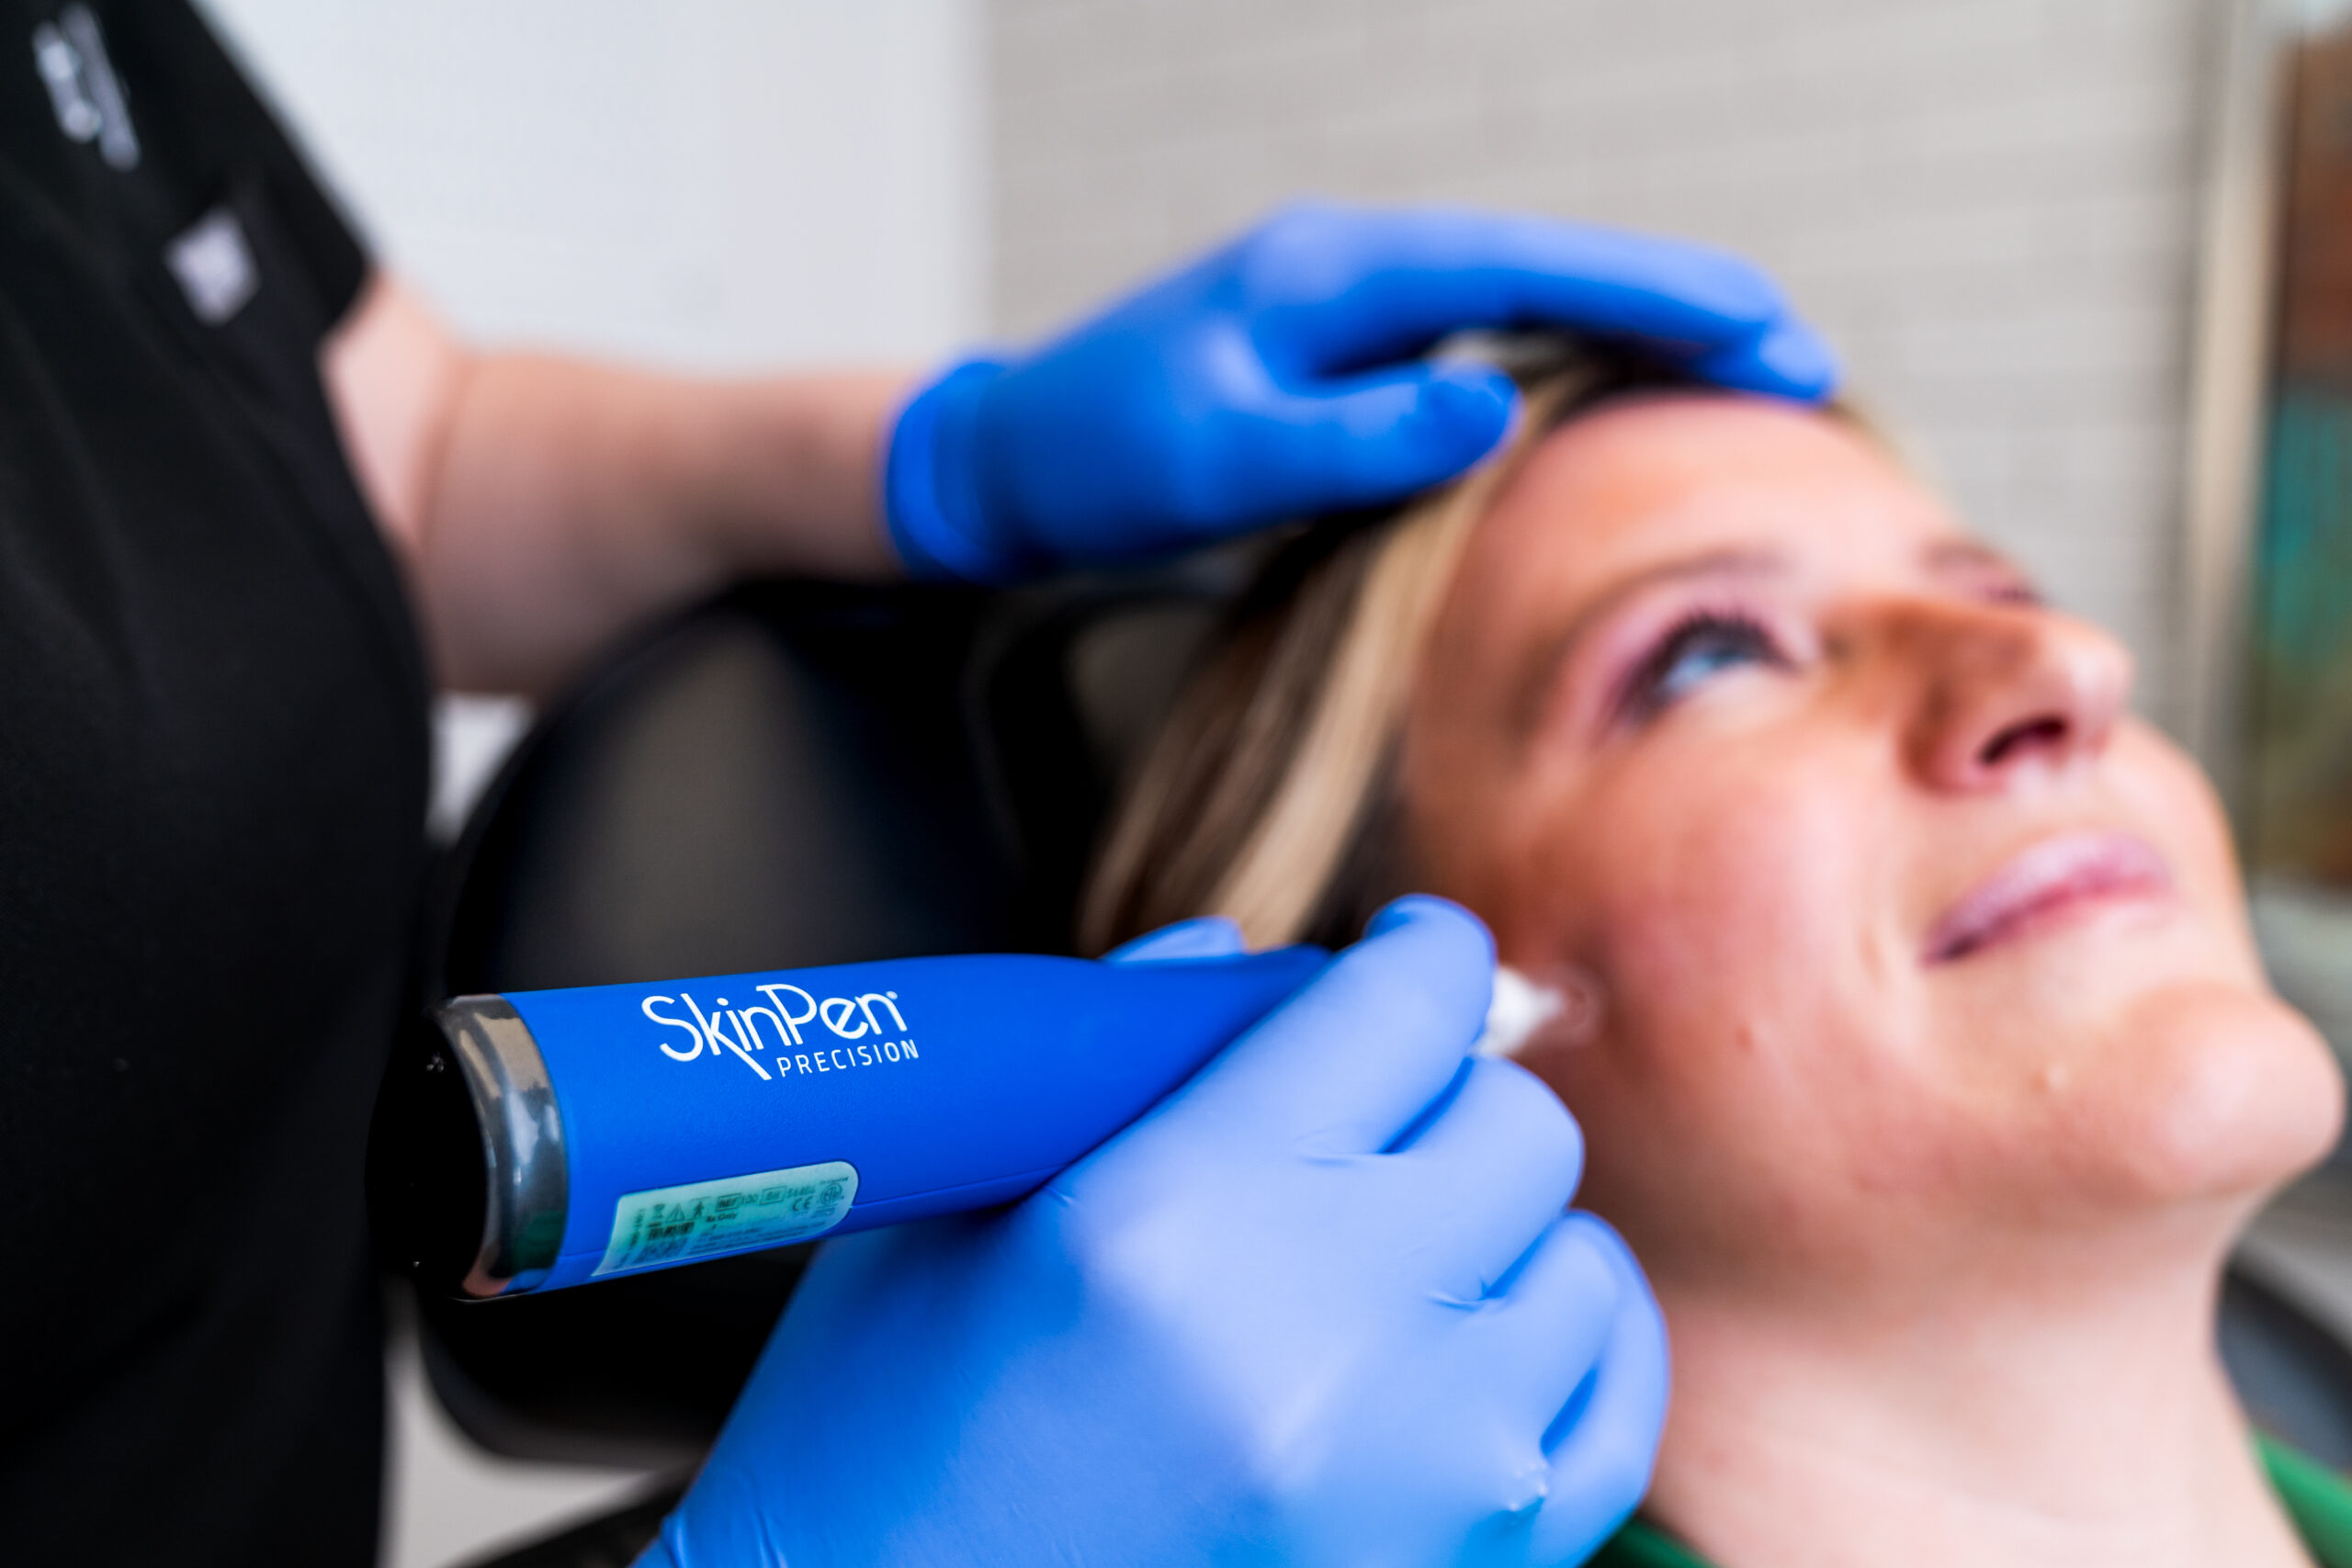 A patient at The Lookshop Aesthetics receives the SkinPen microneedling treatment.